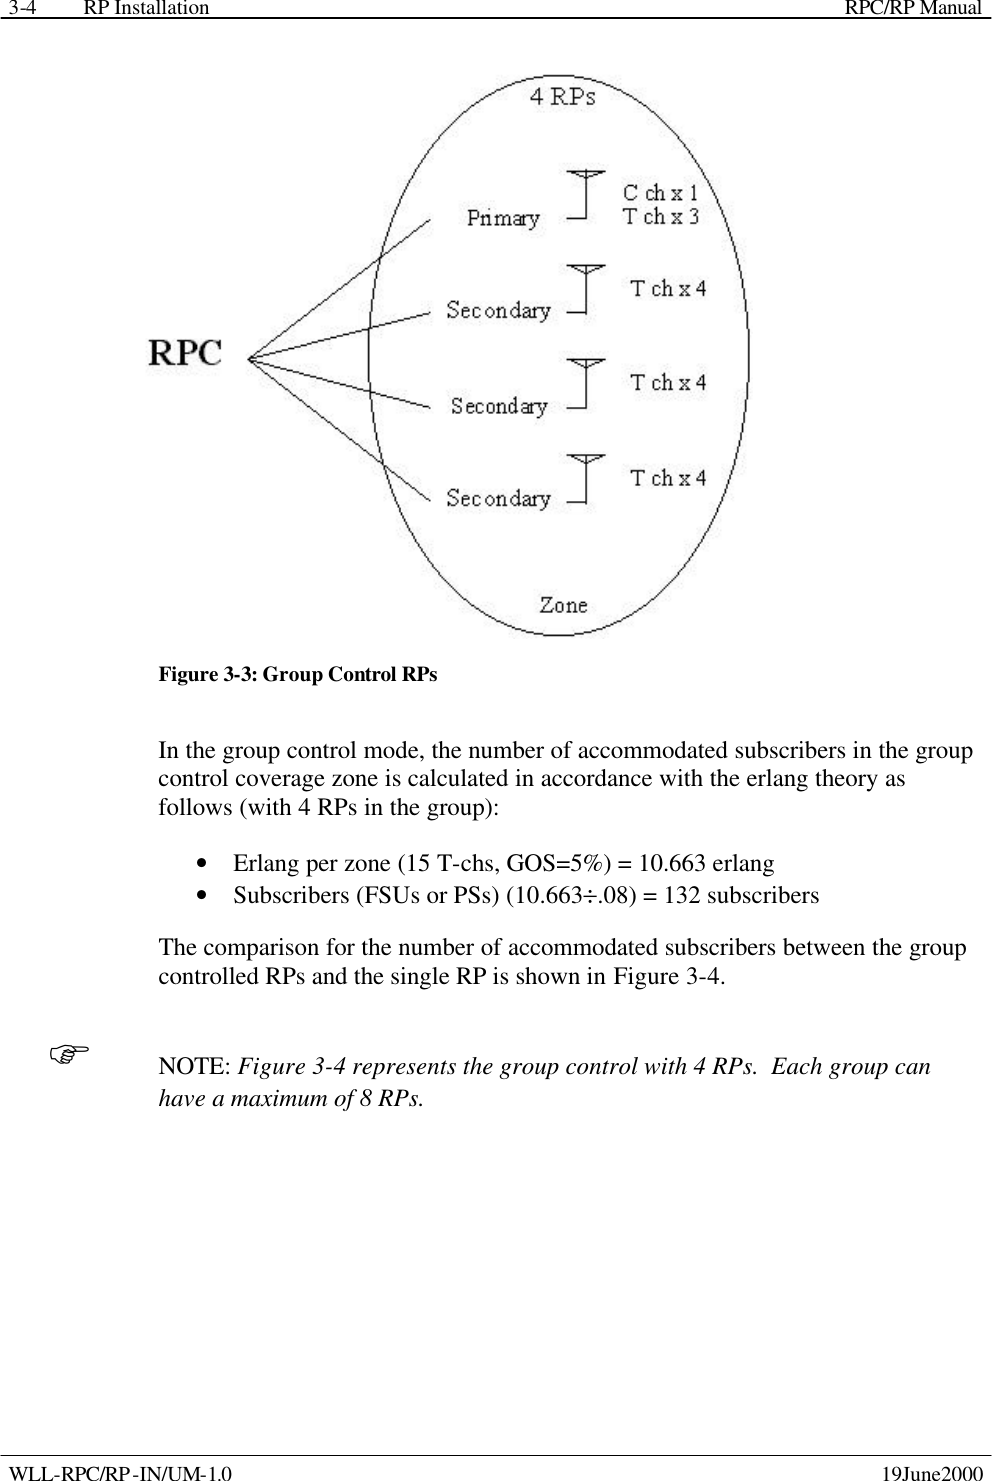 RP Installation    RPC/RP Manual WLL-RPC/RP-IN/UM-1.0    19June2000 3-4 Figure 3-3: Group Control RPs In the group control mode, the number of accommodated subscribers in the group control coverage zone is calculated in accordance with the erlang theory as follows (with 4 RPs in the group): • Erlang per zone (15 T-chs, GOS=5%) = 10.663 erlang • Subscribers (FSUs or PSs) (10.663÷.08) = 132 subscribers The comparison for the number of accommodated subscribers between the group controlled RPs and the single RP is shown in Figure 3-4. F NOTE: Figure 3-4 represents the group control with 4 RPs.  Each group can have a maximum of 8 RPs. 